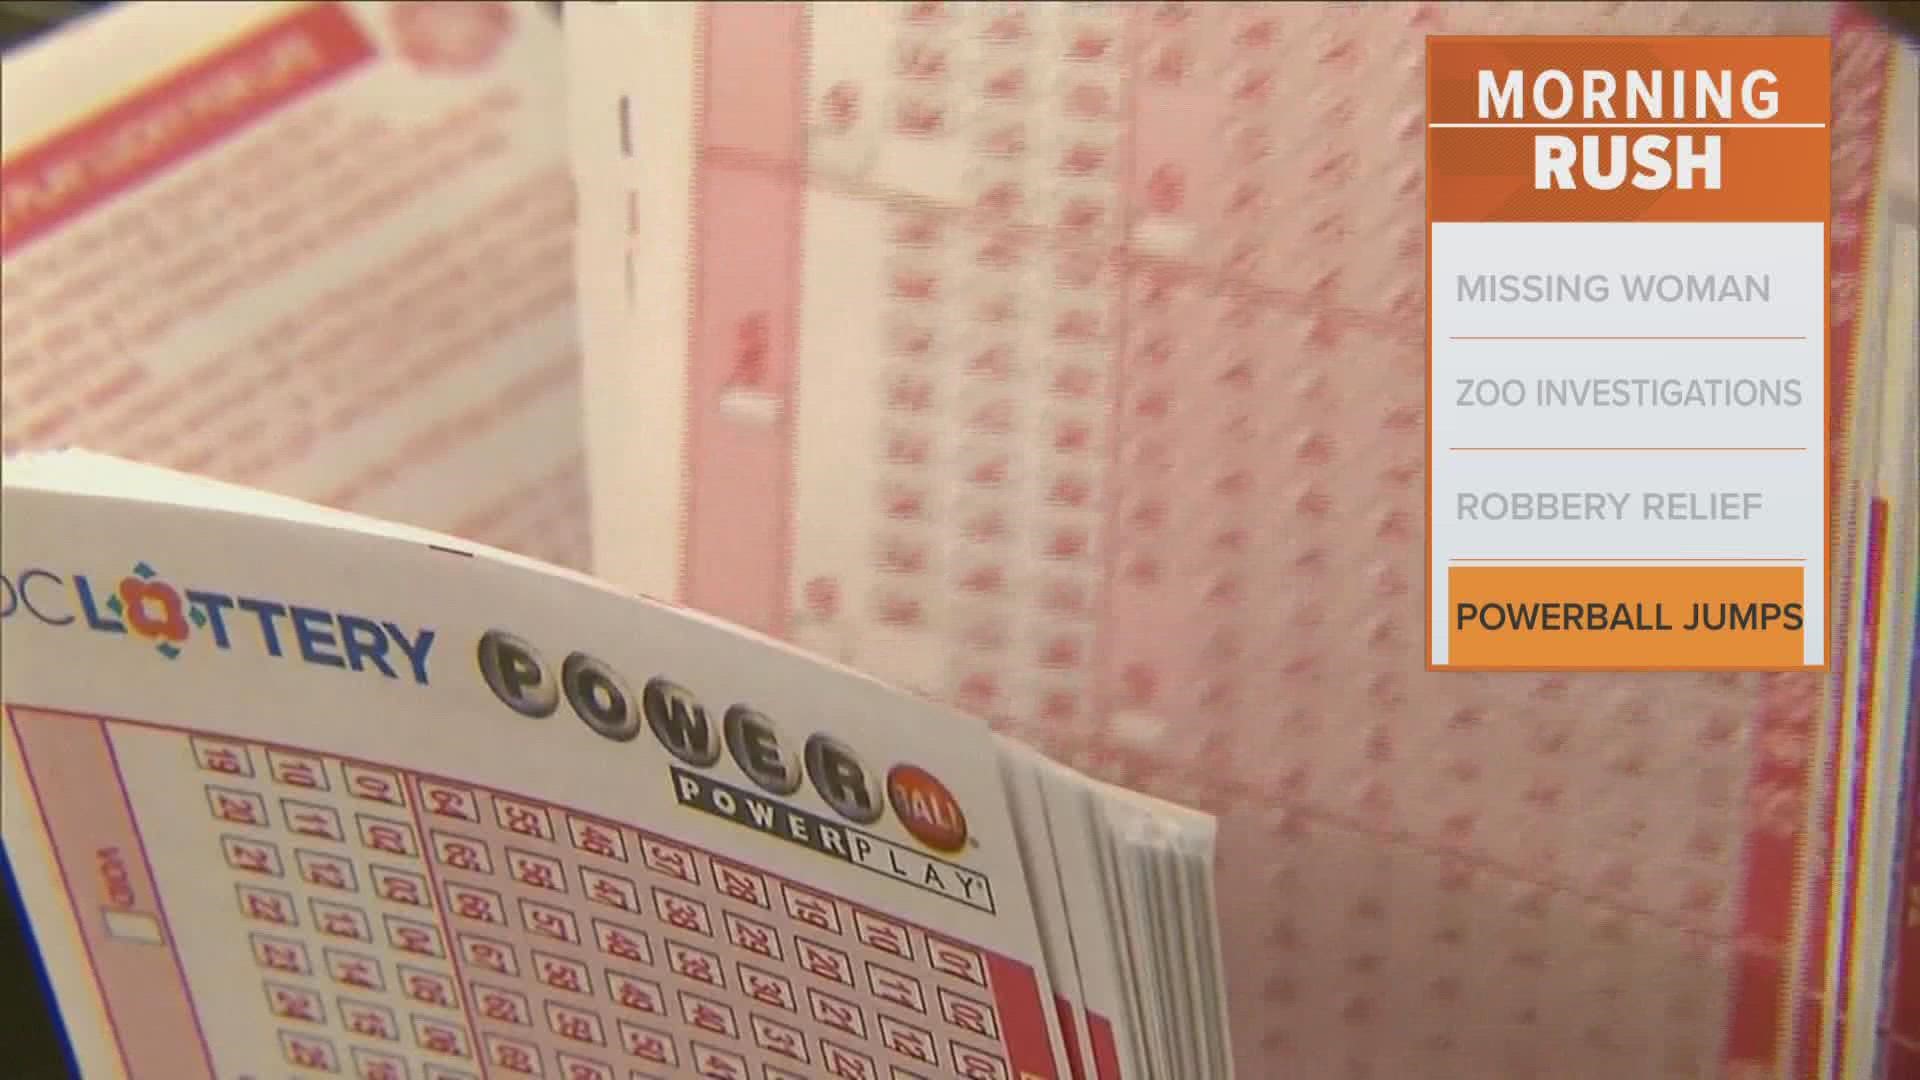 2022 was a big year for lottery jackpots. With a $1.35B prize won and another jackpot growing, 2023 may be no different.